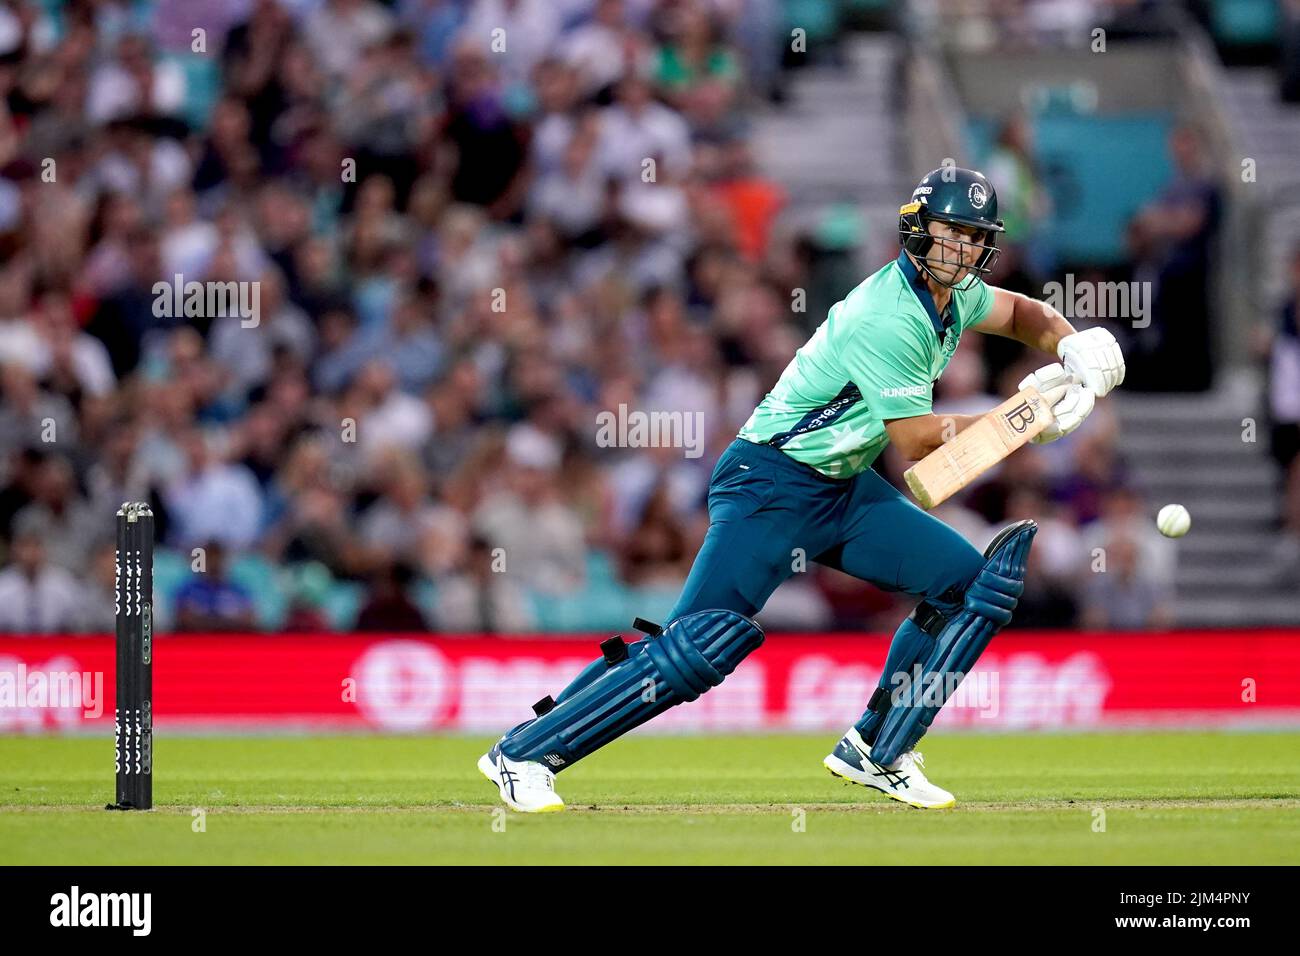 Oval Invincible's Hilton Cartwright batting during The Hundred match at The Kia Oval, London. Picture date: Thursday August 4, 2022. Stock Photo